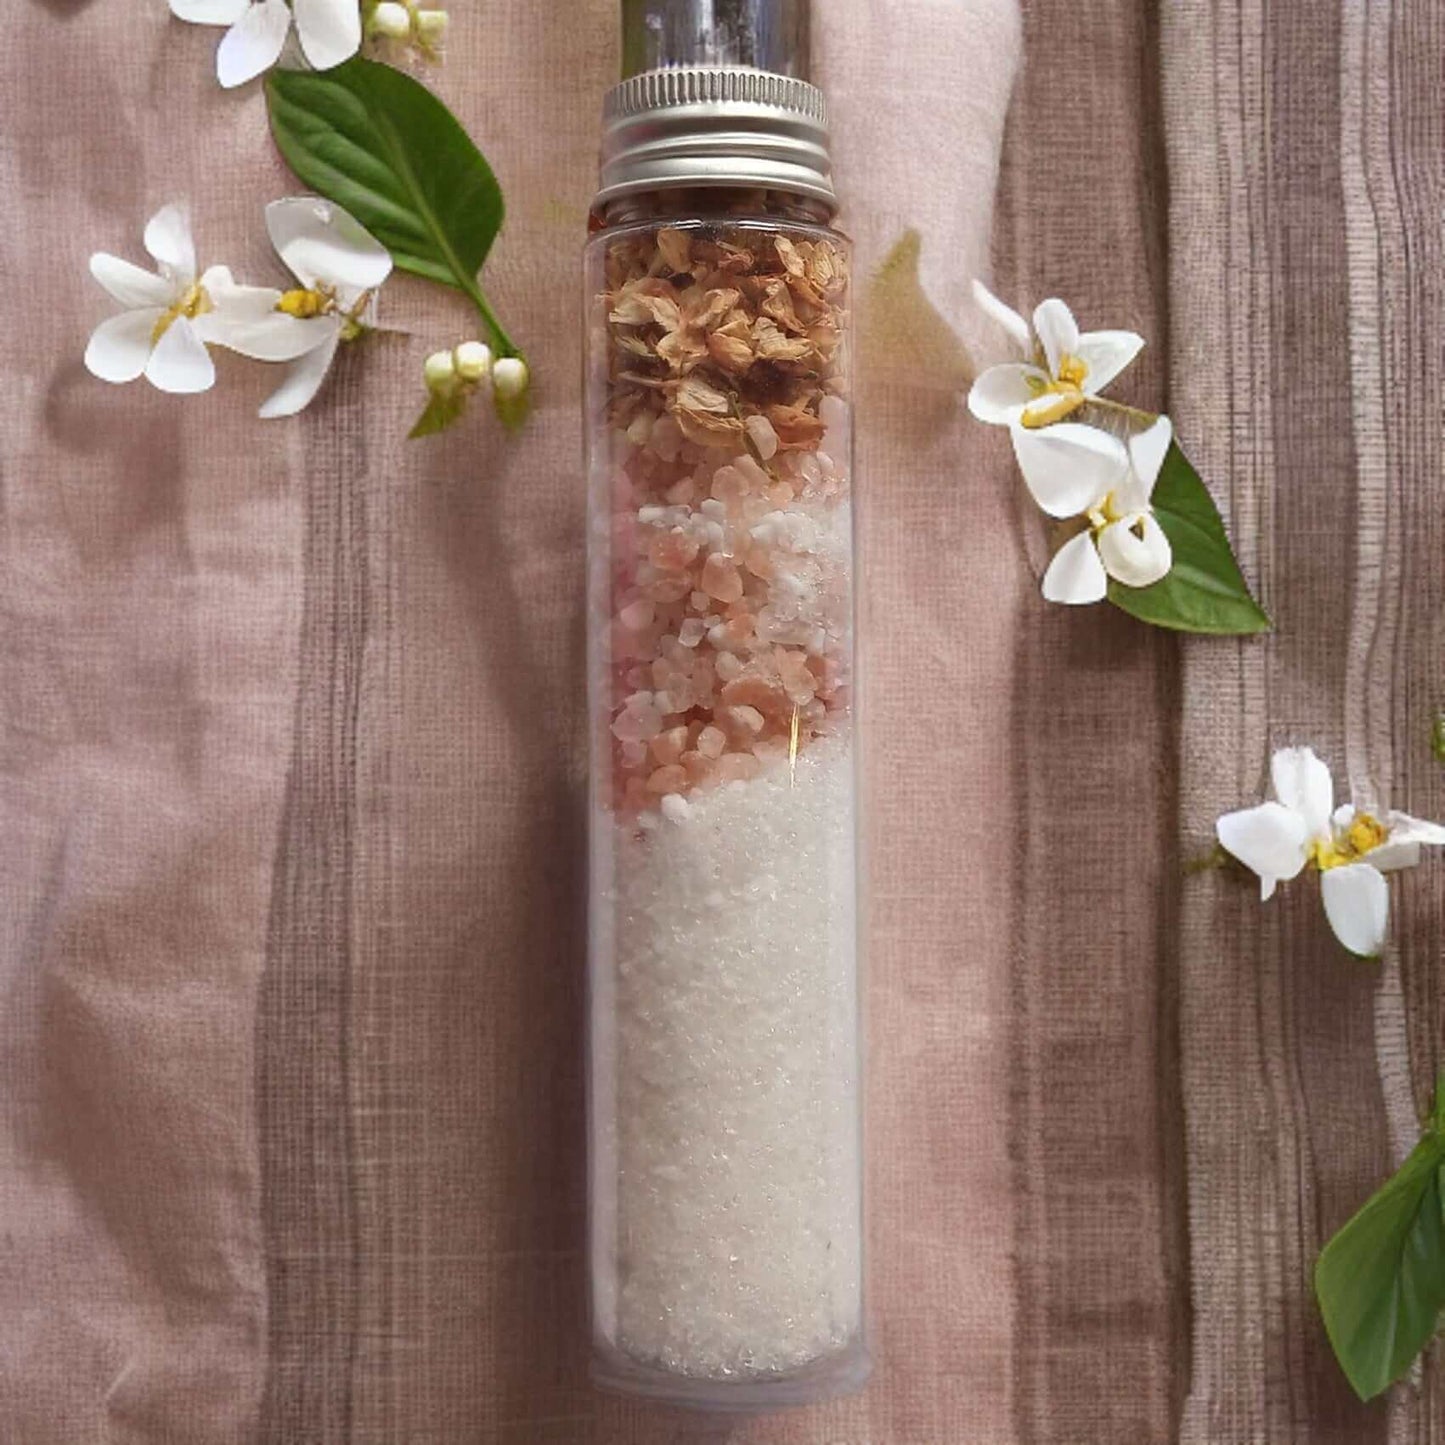 Unwind with Woodbine Jessamy's exquisite bath salts, packed with minerals and botanicals for your ultimate spa experience!